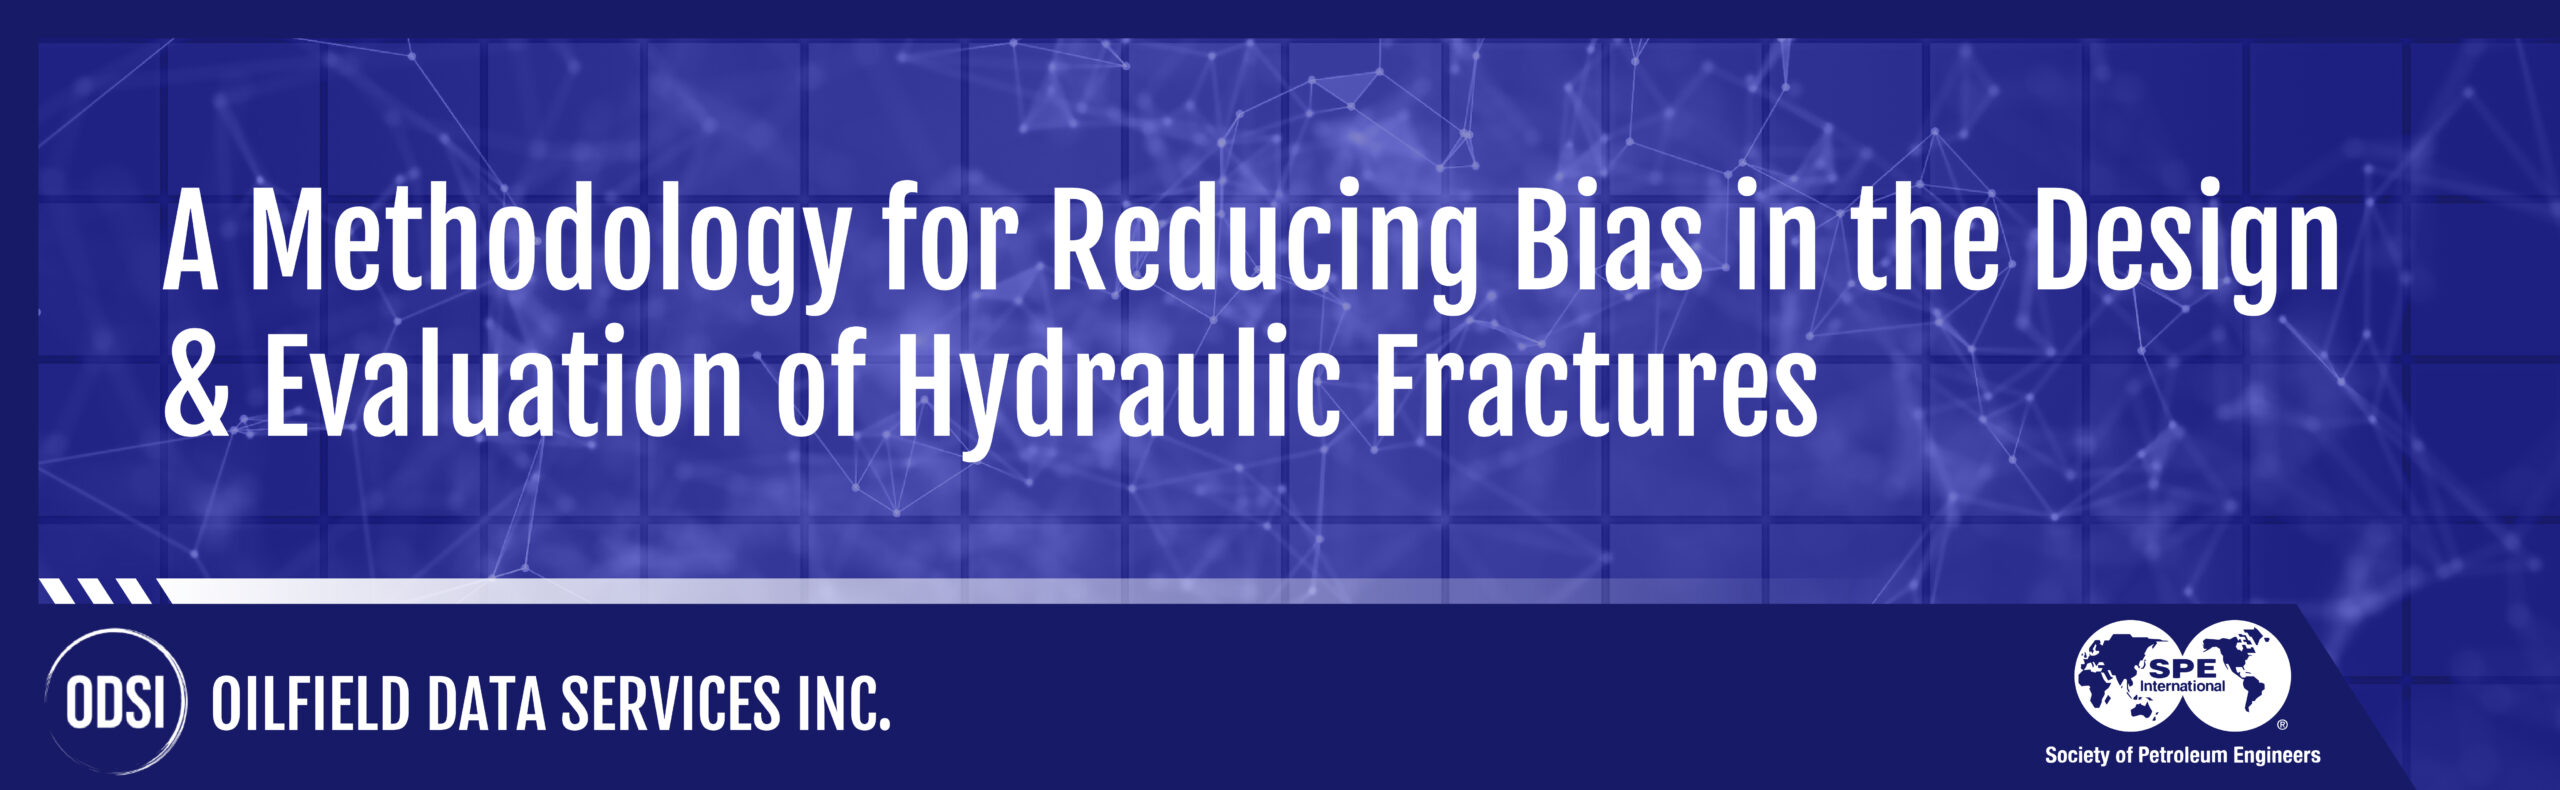 A Methodology for Reducing Bias in the Design & Evaluation of Hydraulic Fractures